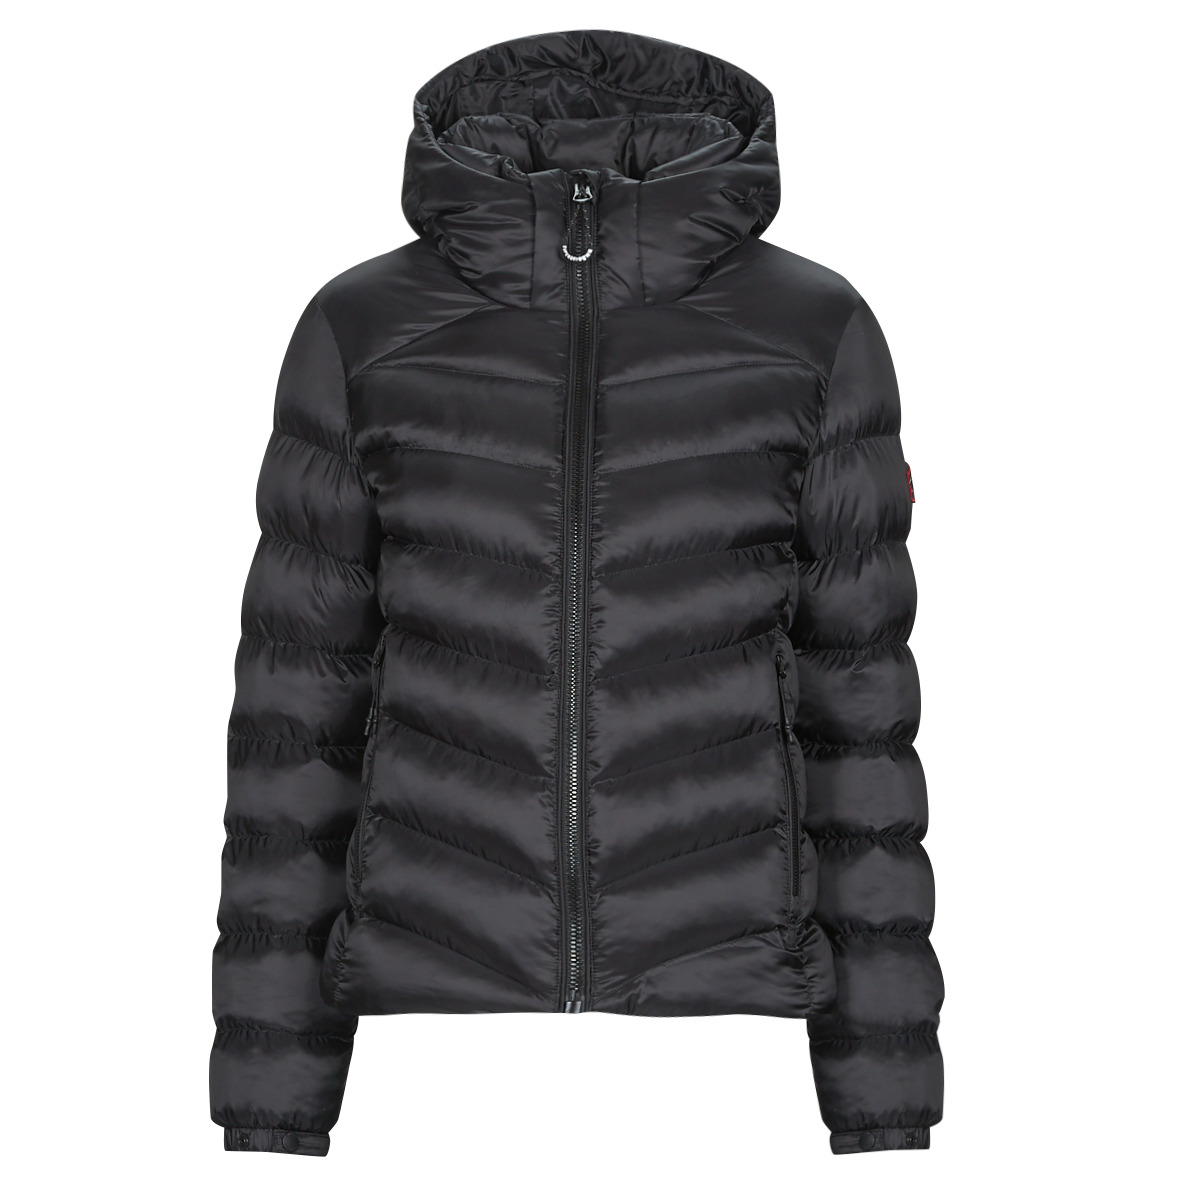 Superdry HOODED Spartoo coats | ! Duffel - NET delivery Black FUJI JACKET Women Free - Clothing PADDED